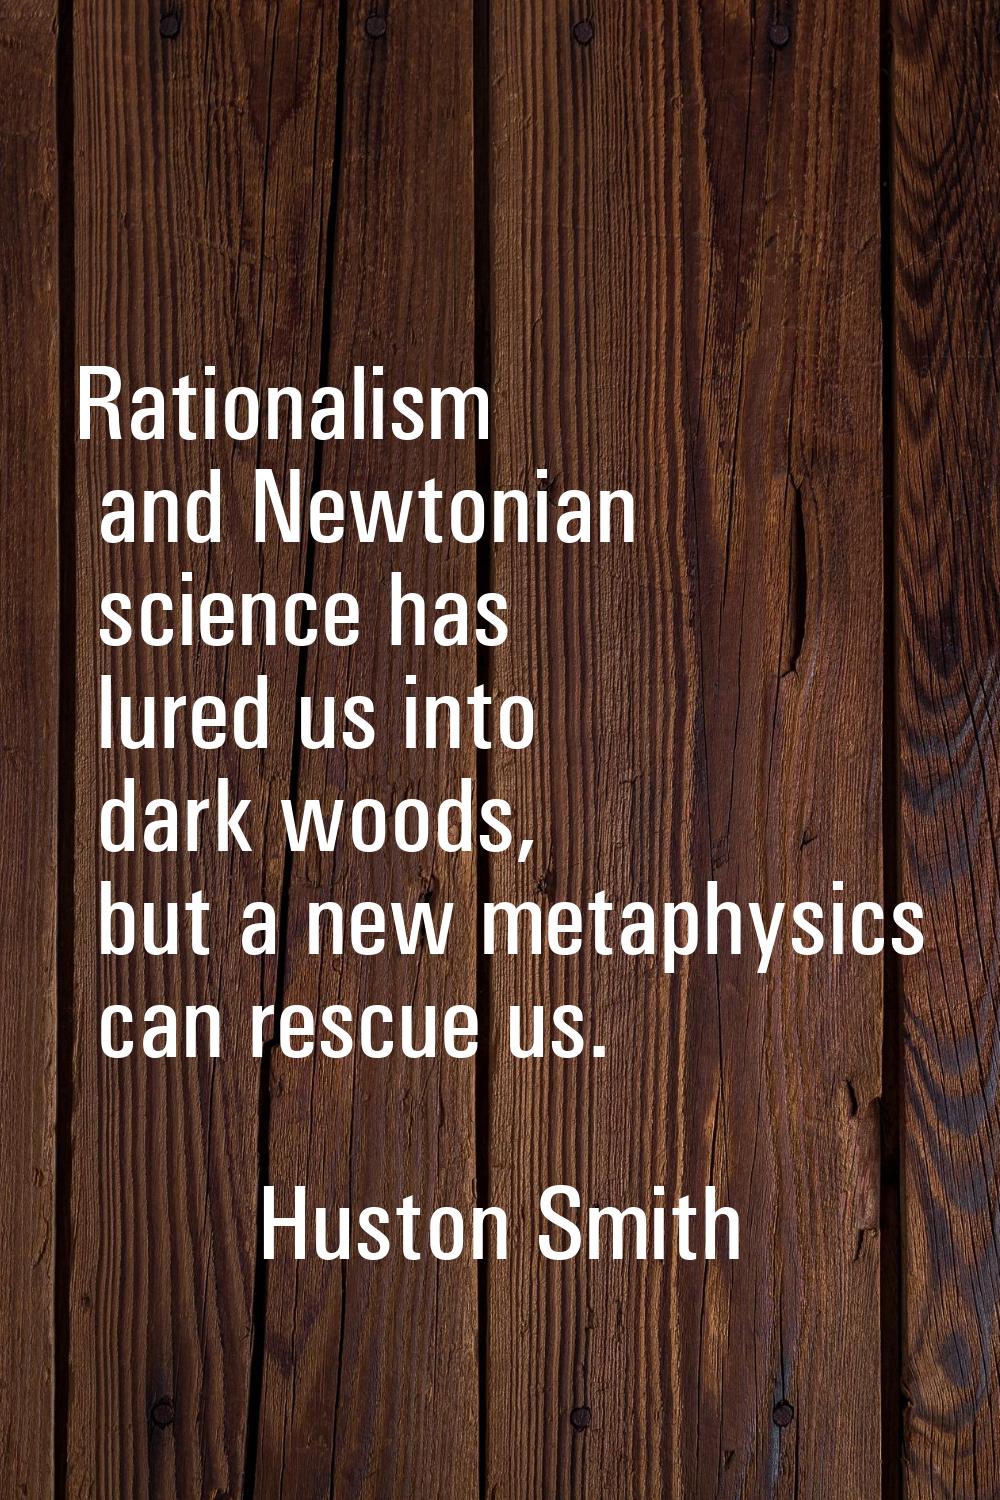 Rationalism and Newtonian science has lured us into dark woods, but a new metaphysics can rescue us